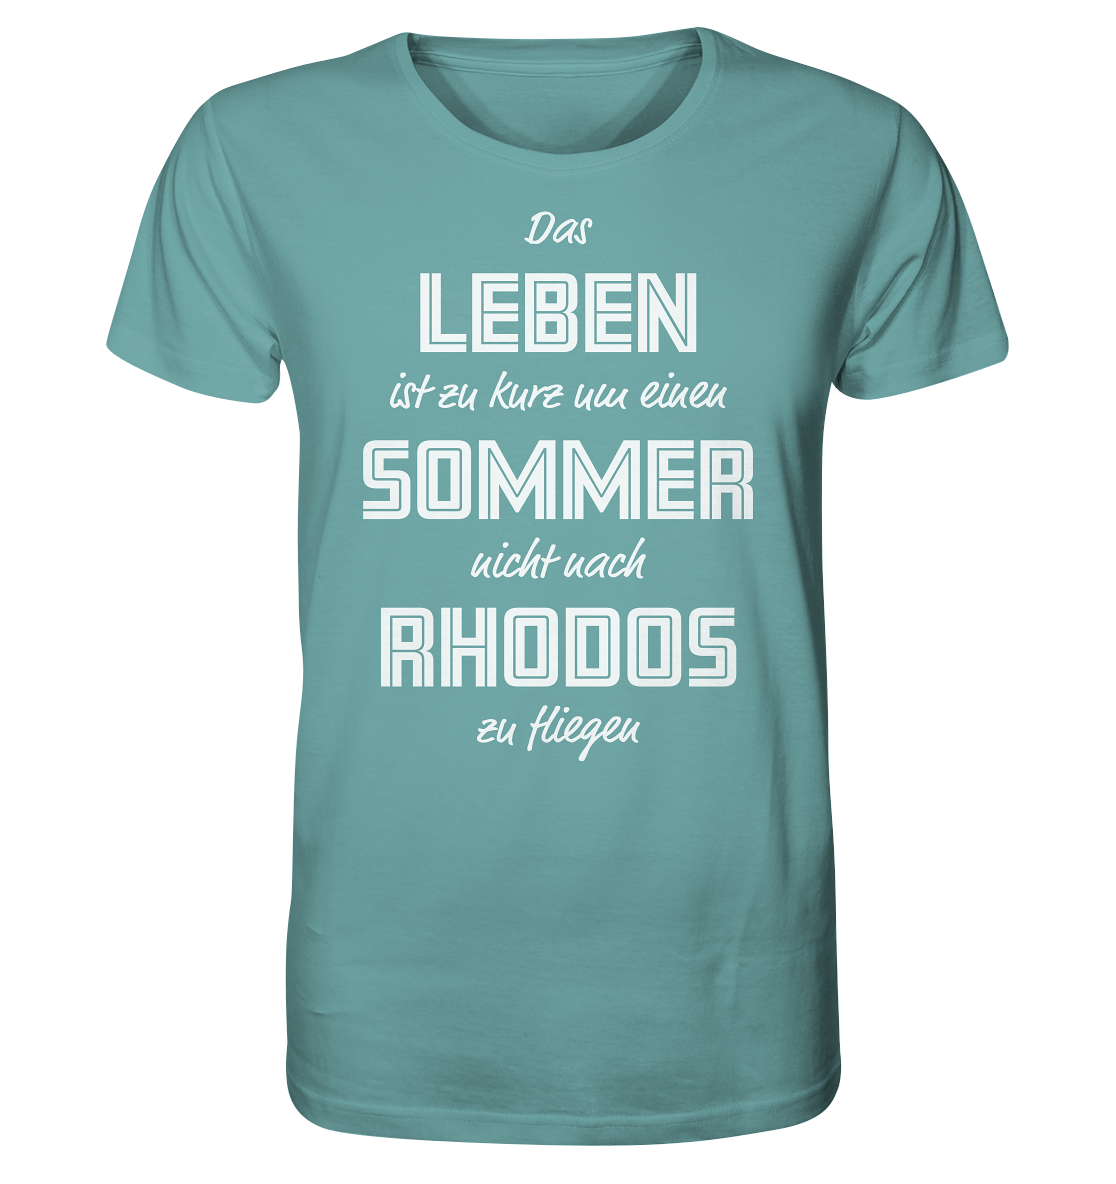 Life is too short not to fly to Rhodes for a summer - Organic Shirt